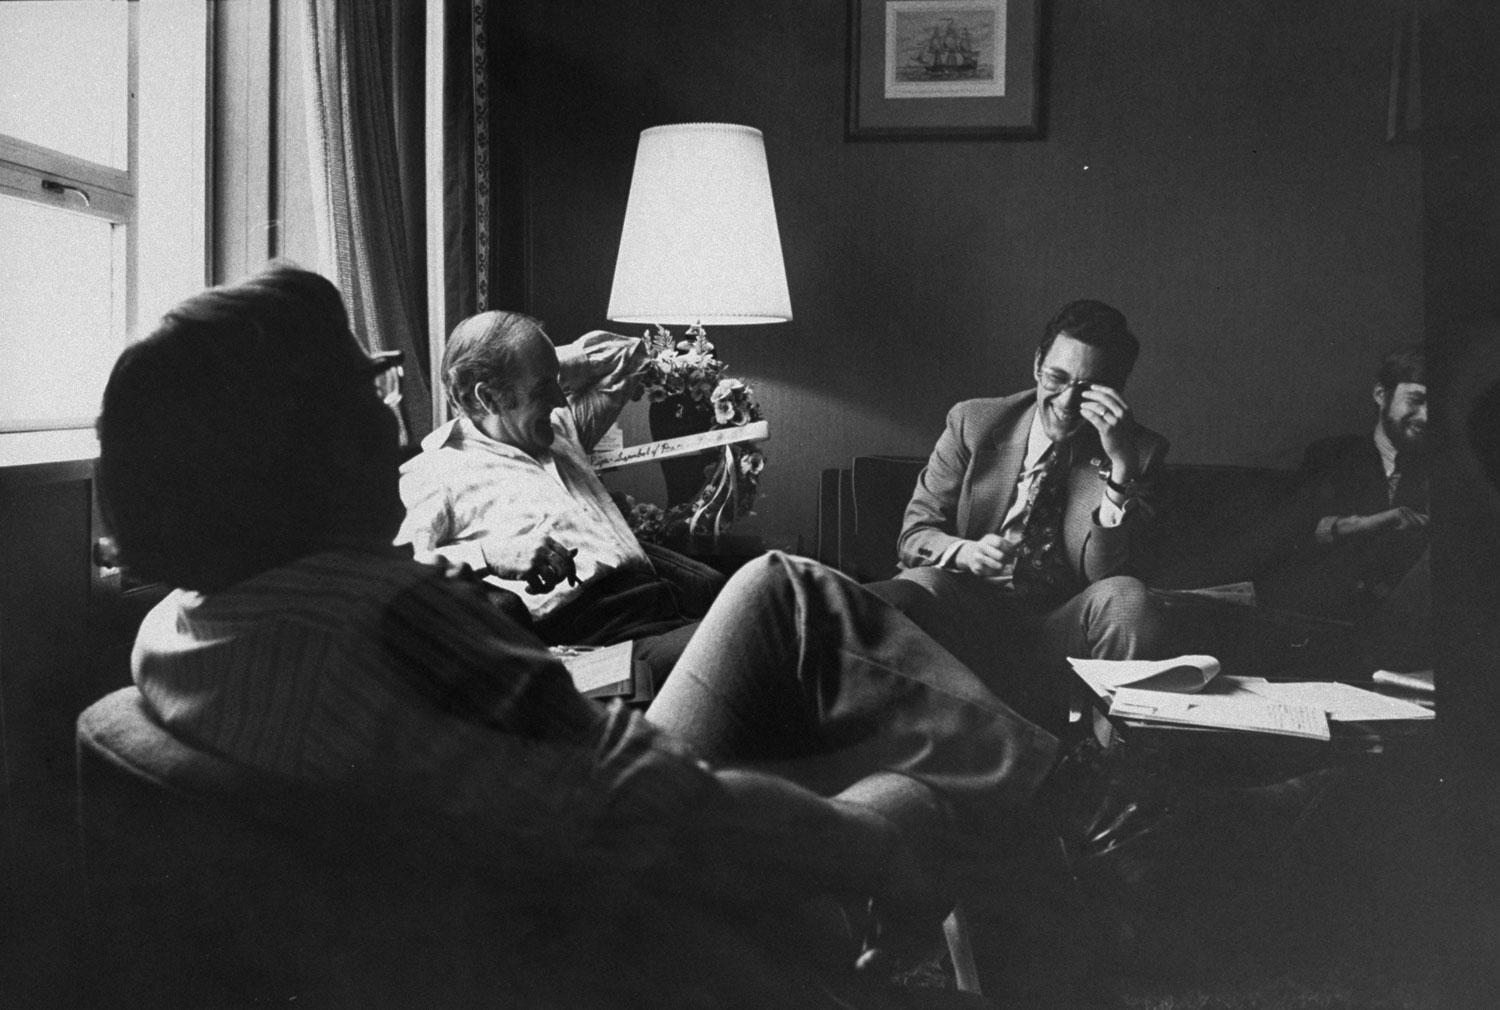 George McGovern strategizes with his team, 1972.